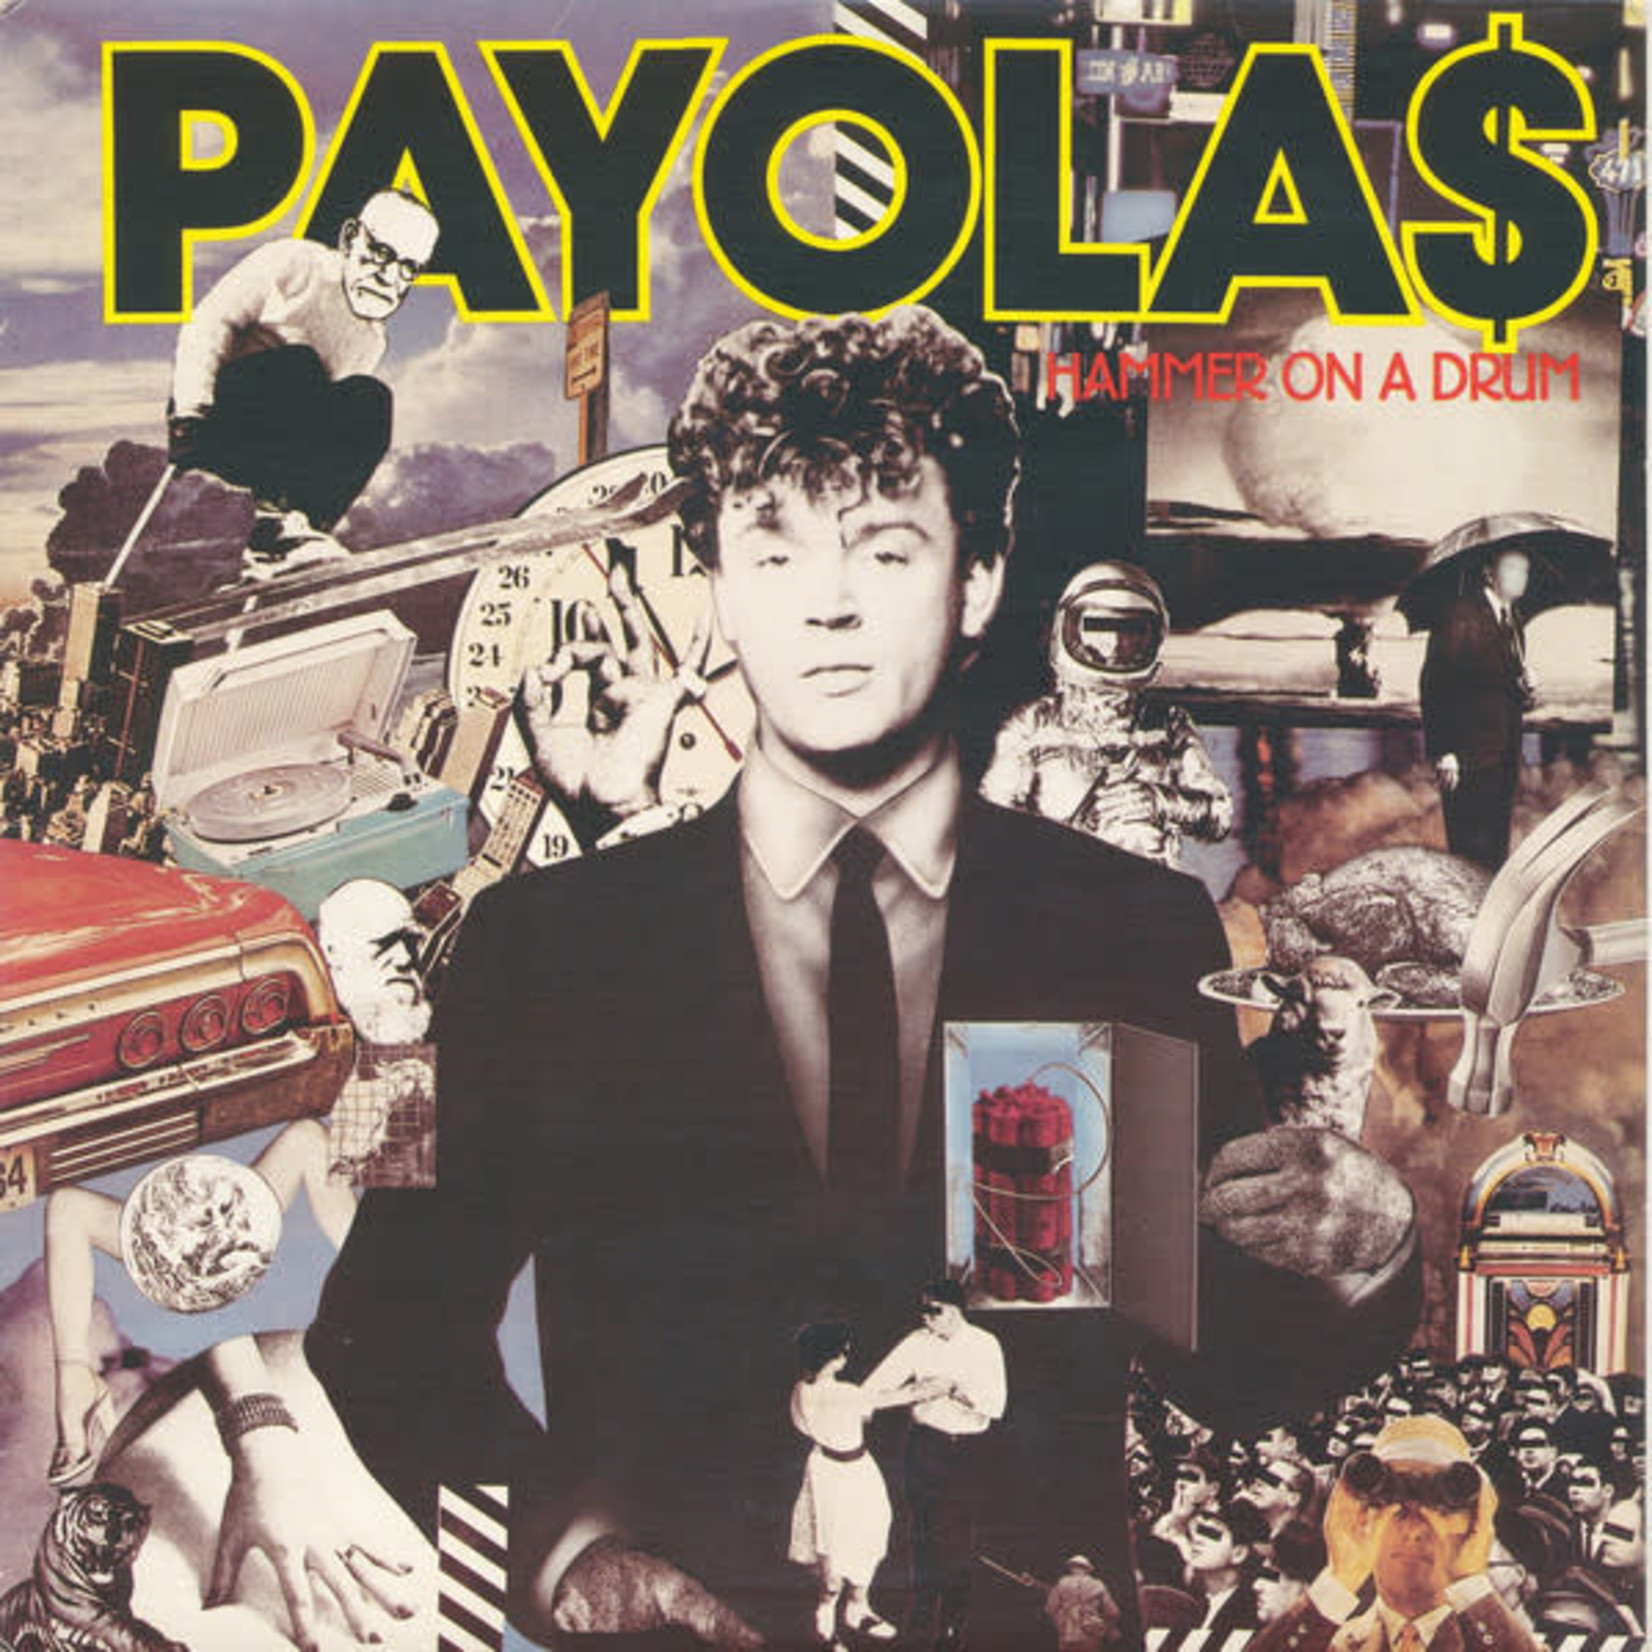 Payolas Payola$ – Hammer On A Drum (VG, 1983, LP, A&M Records – SP 4958, Canada)